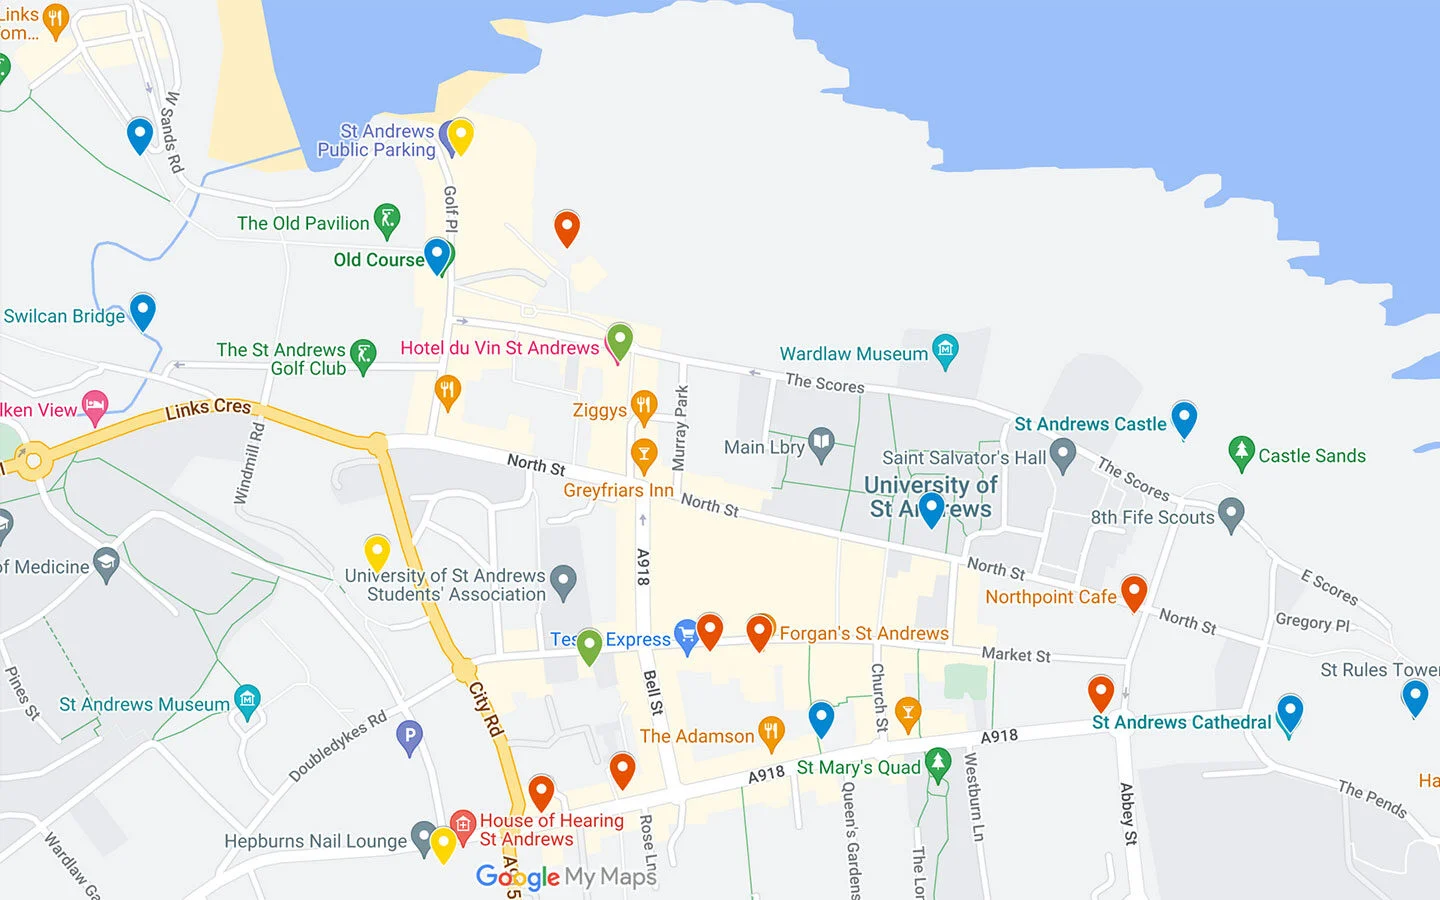 Map of things to do on a weekend in St Andrews